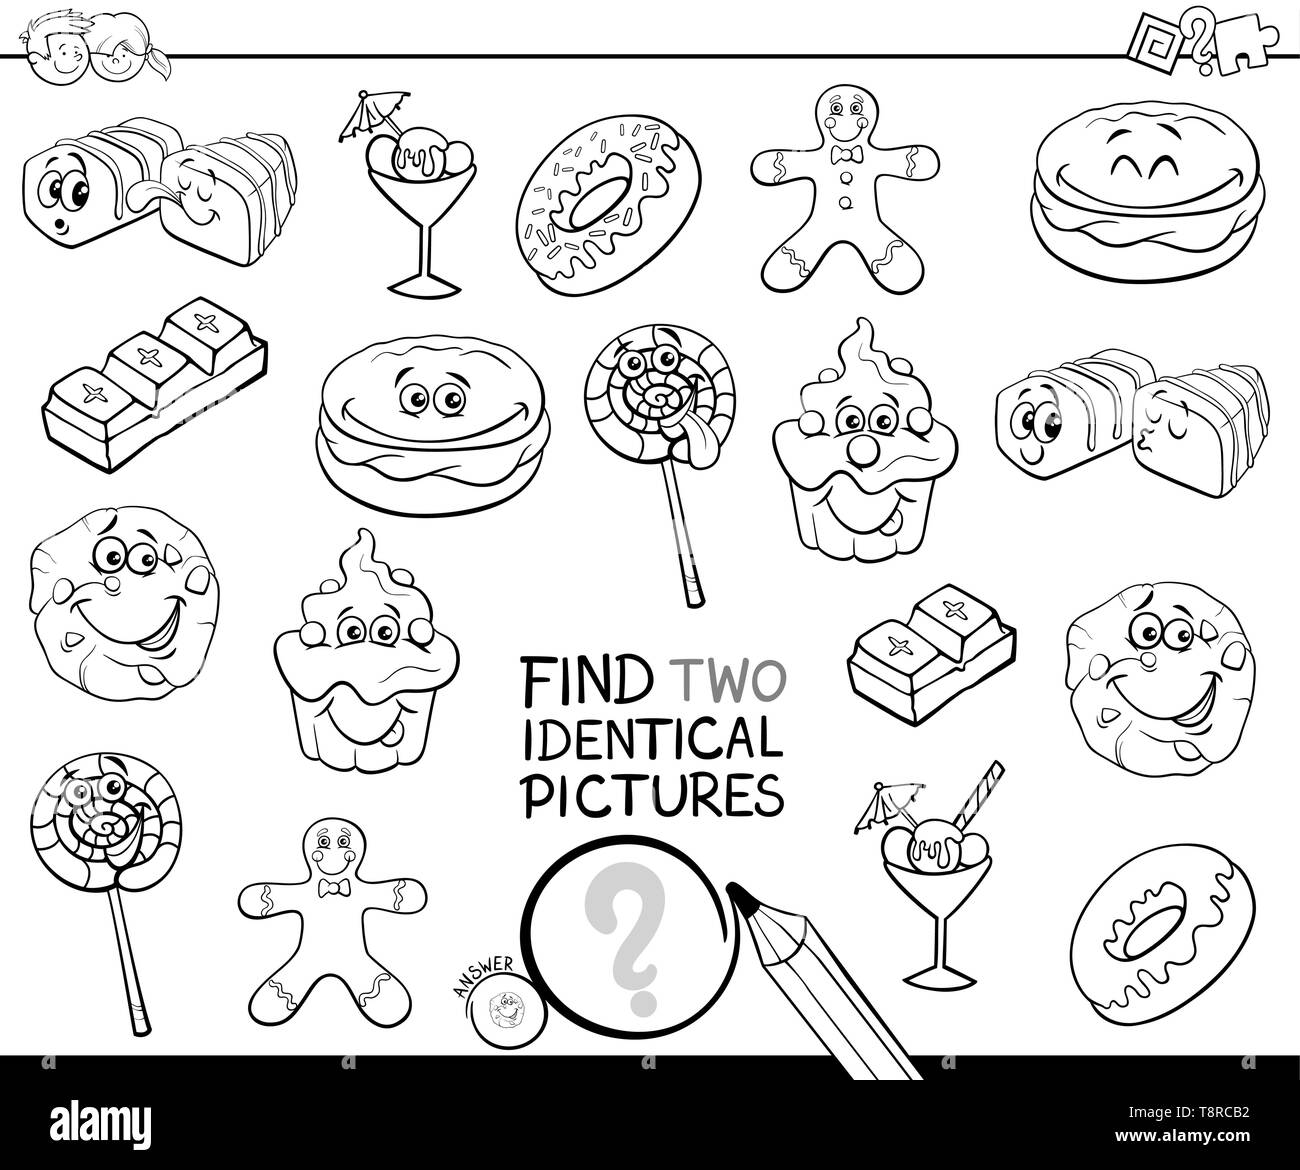 Black and White Cartoon Illustration of Finding Two Identical Pictures Educational Game for Children with Sweet Food Characters Coloring Book Stock Vector